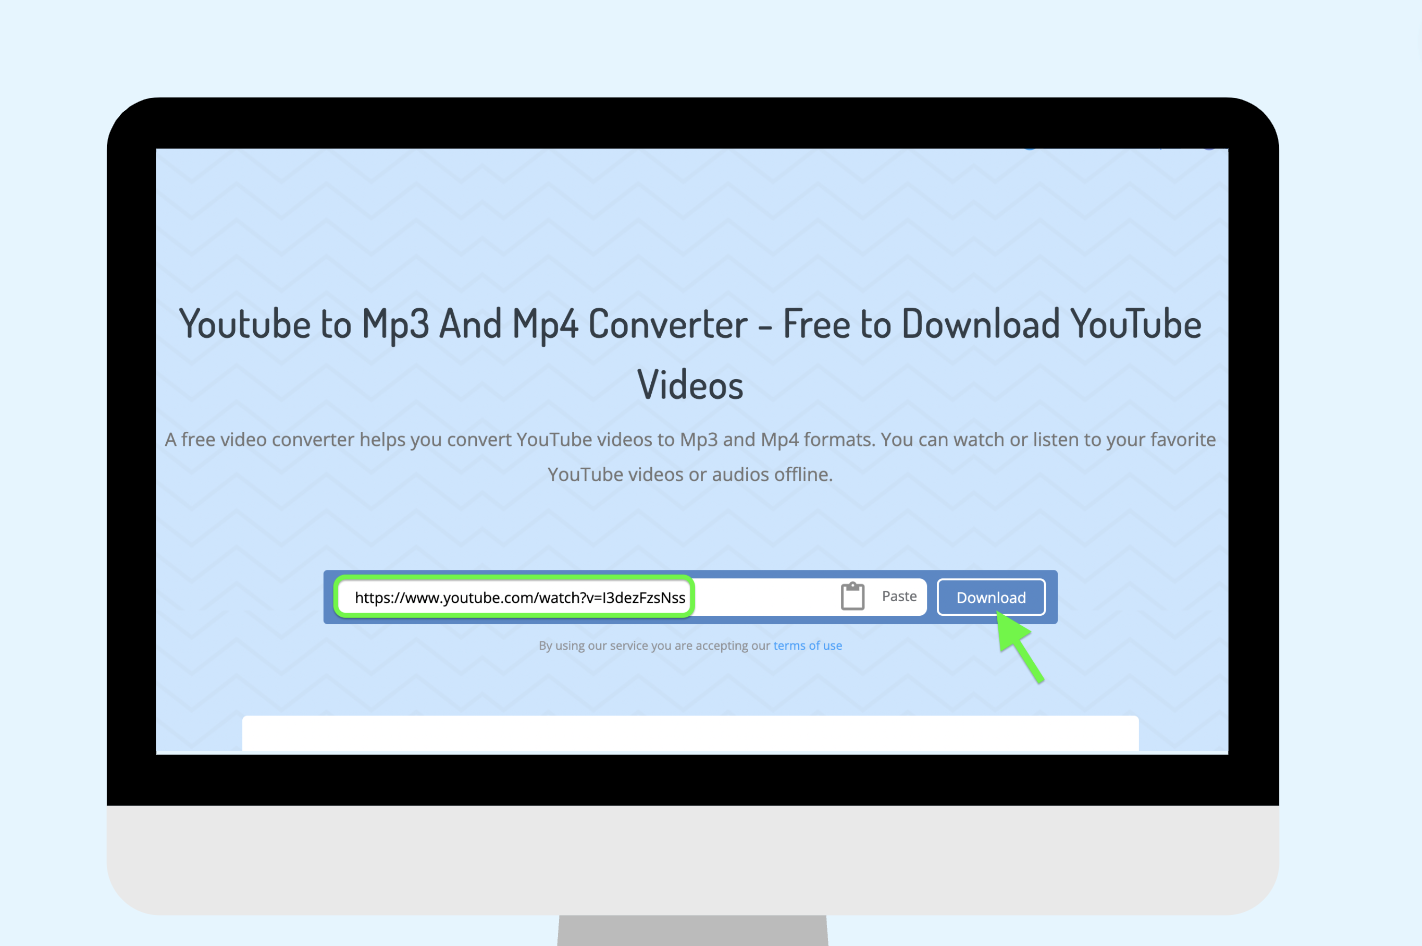 Use Online Downloader to download YouTube video
